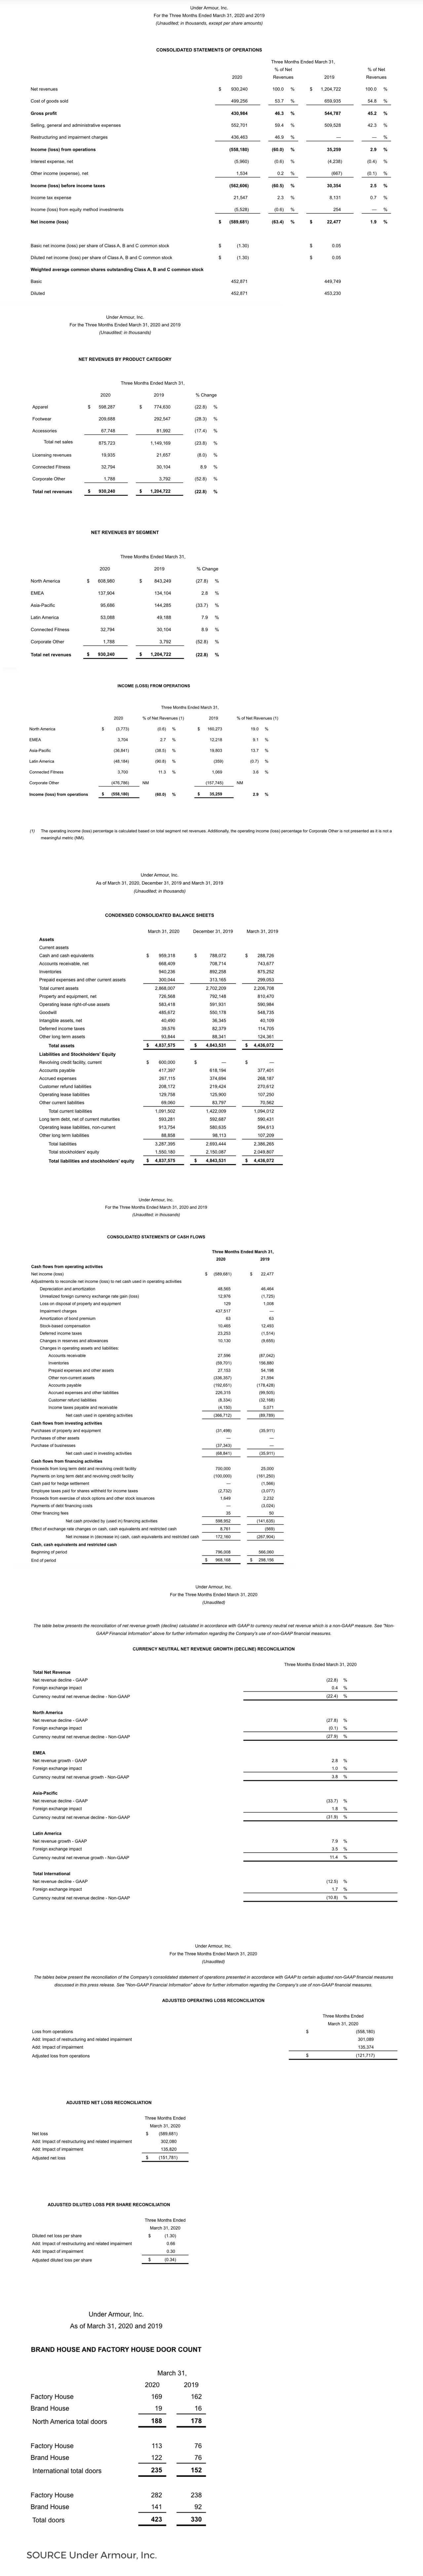 Q1 2020 Earnings Results Financial Charts